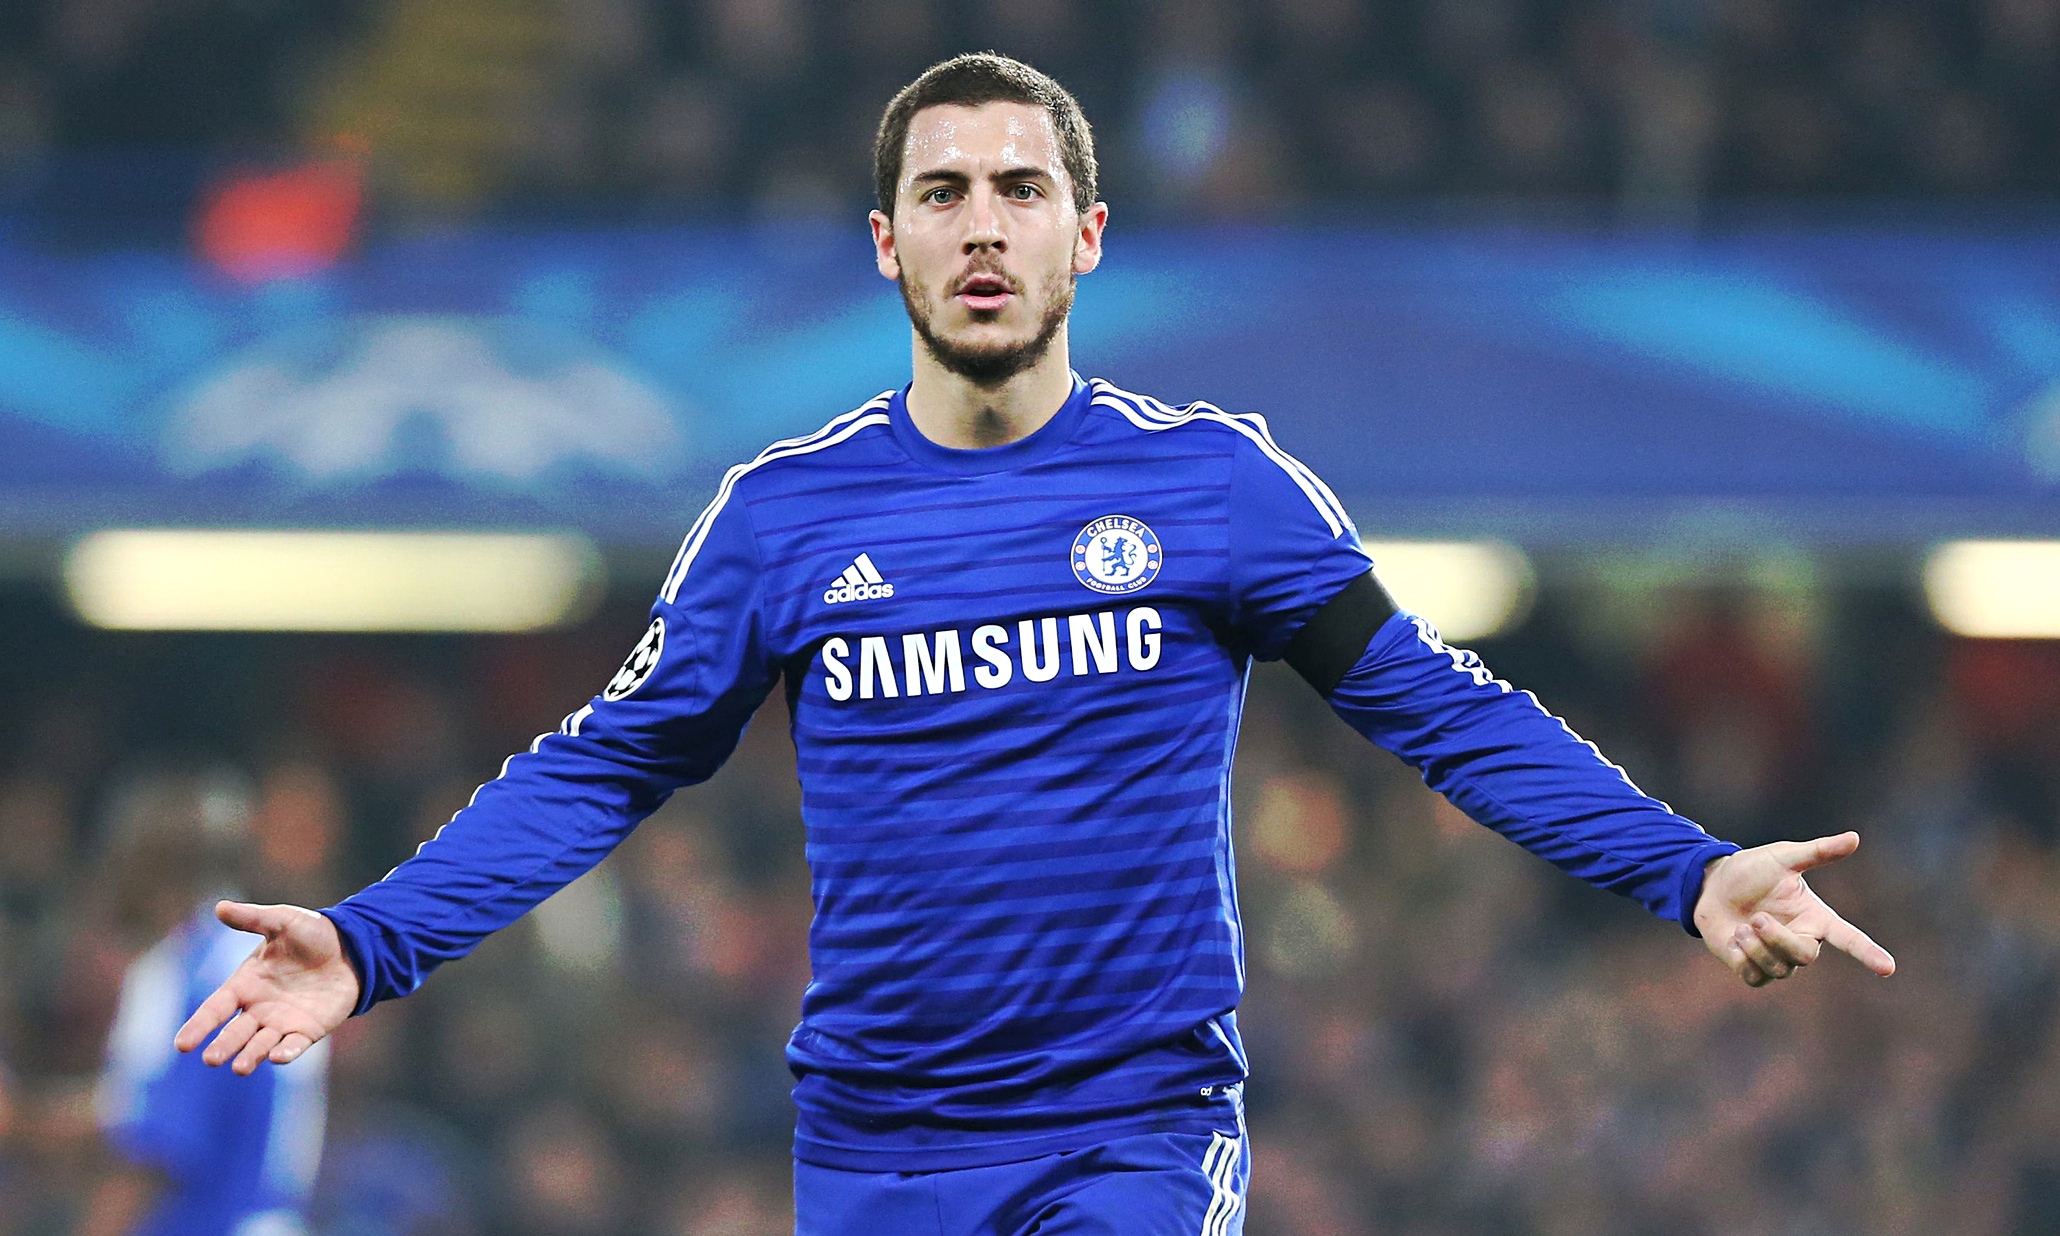 Eden Hazards Chelsea troubles gather pace as Real Madrid links intensify [Papers]